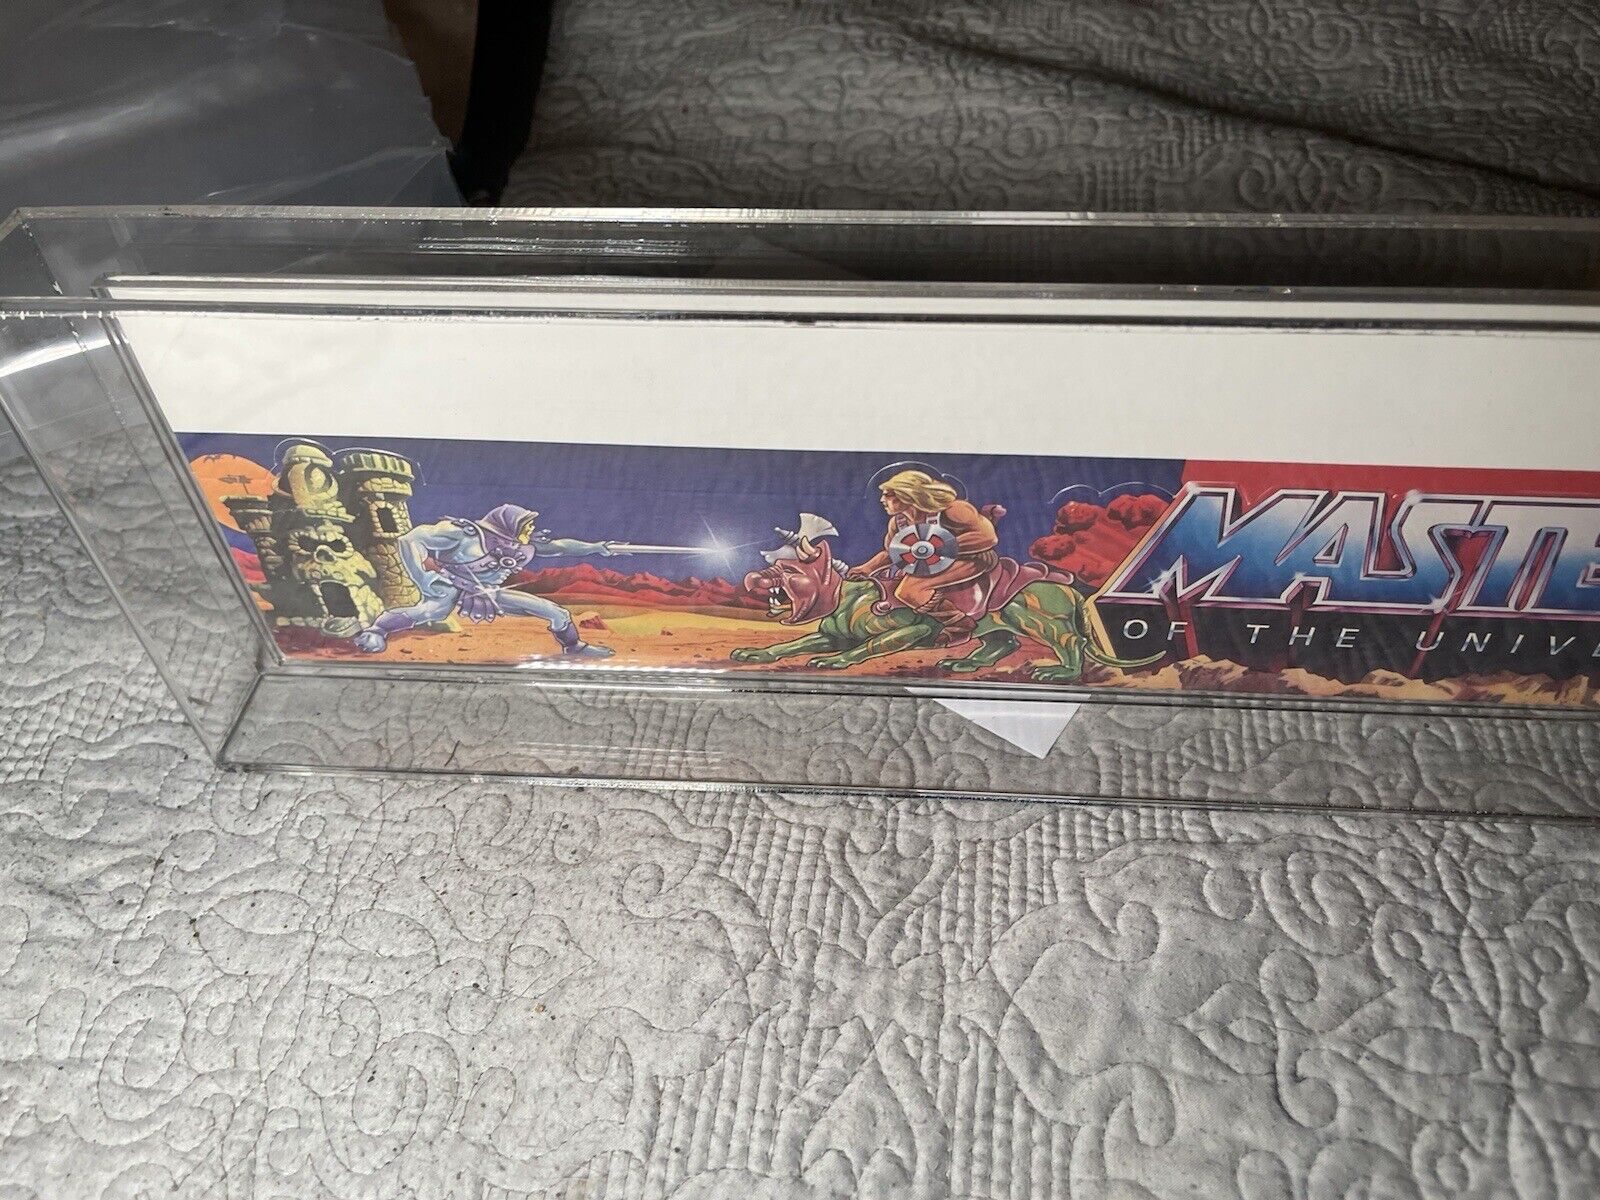 Masters of the universe 1981 Shelf Talker Cas 85 New!